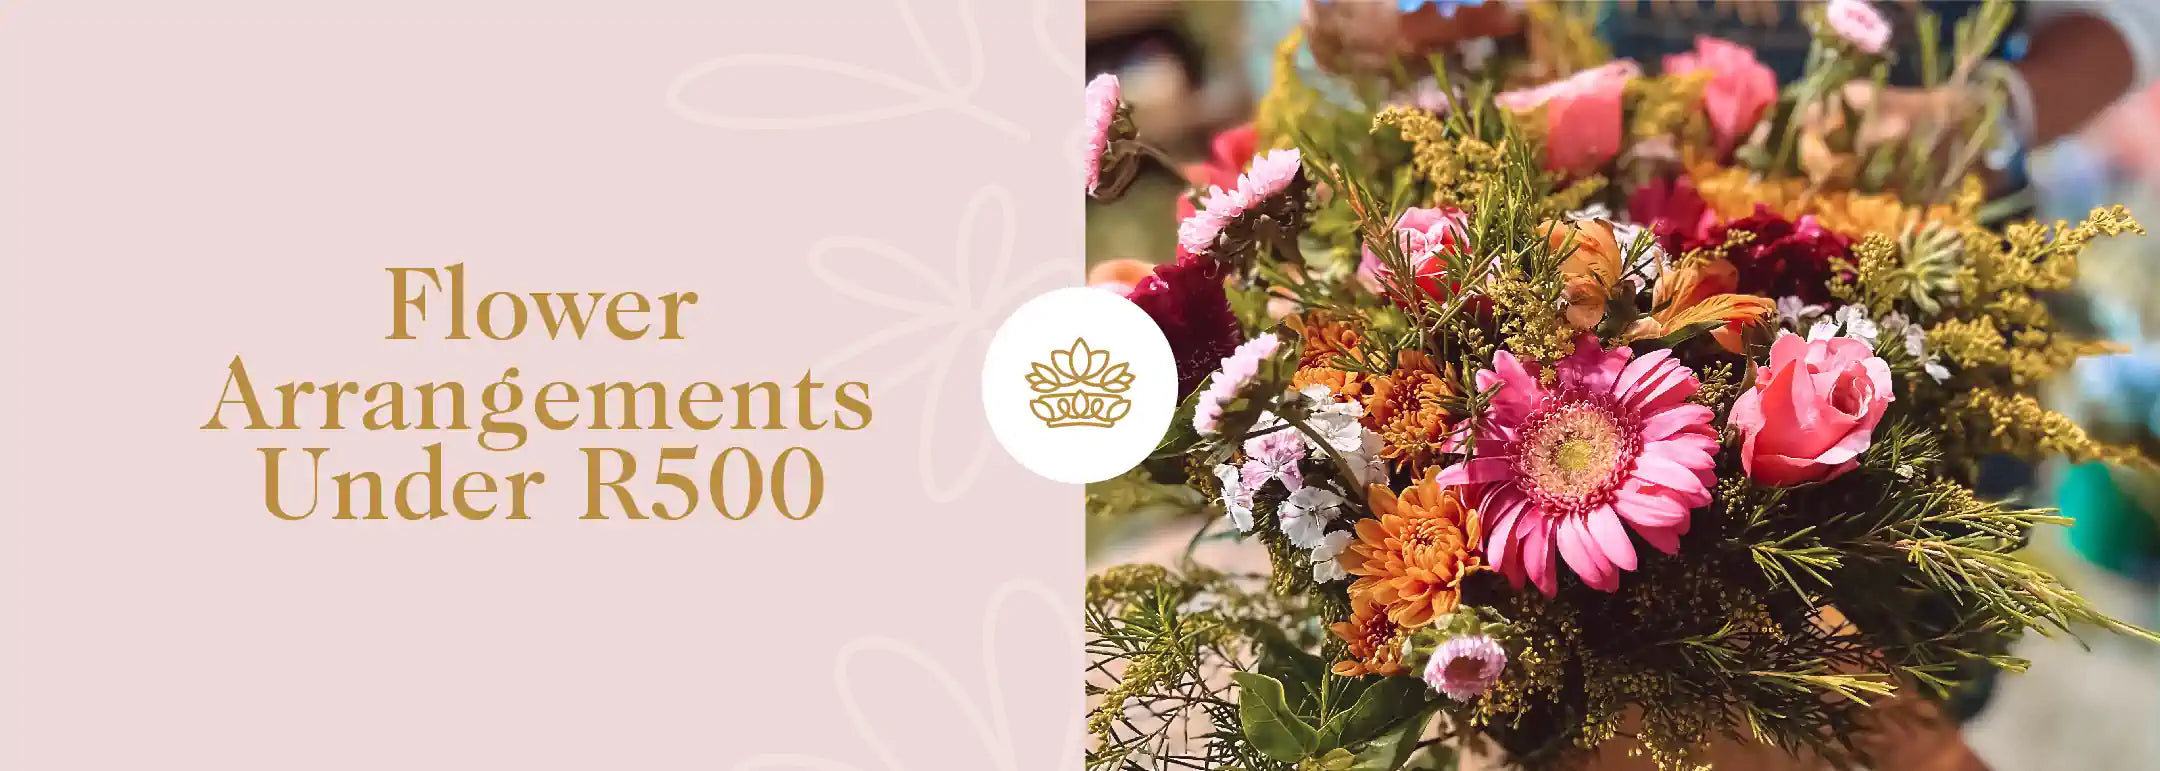 A vibrant and colorful bouquet of mixed flowers, showcasing a variety of blooms, available in the affordable range of under R500. Flower Arrangements under R500 Collection by Fabulous Flowers and Gifts.